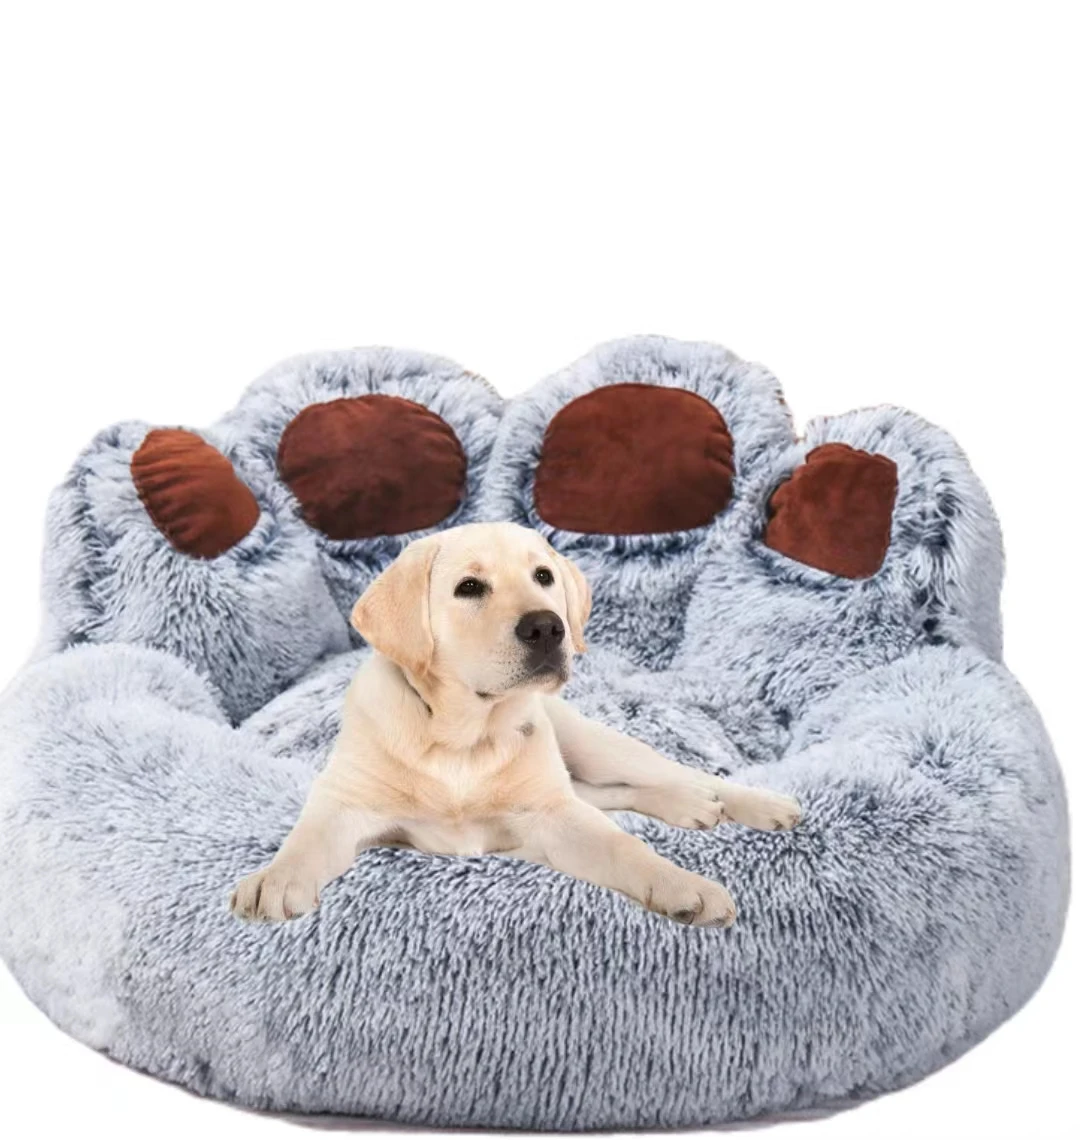 

Hot Selling Fall Winter Round Shape Pet Sleeping Bed Warm Dog House Cozy Furry Nest For Dog Cat